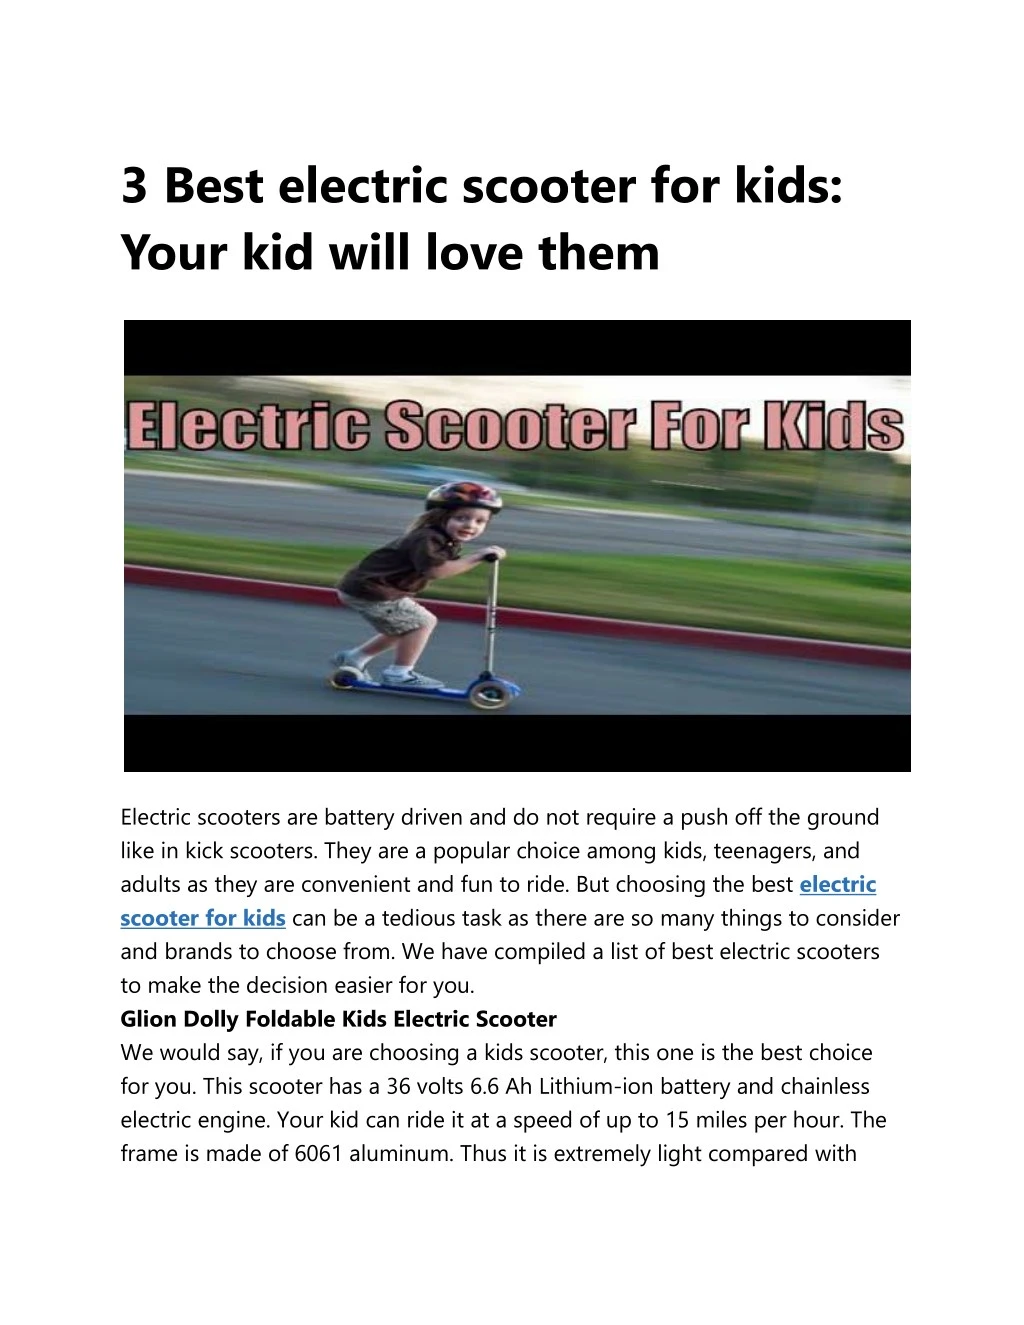 3 best electric scooter for kids your kid will